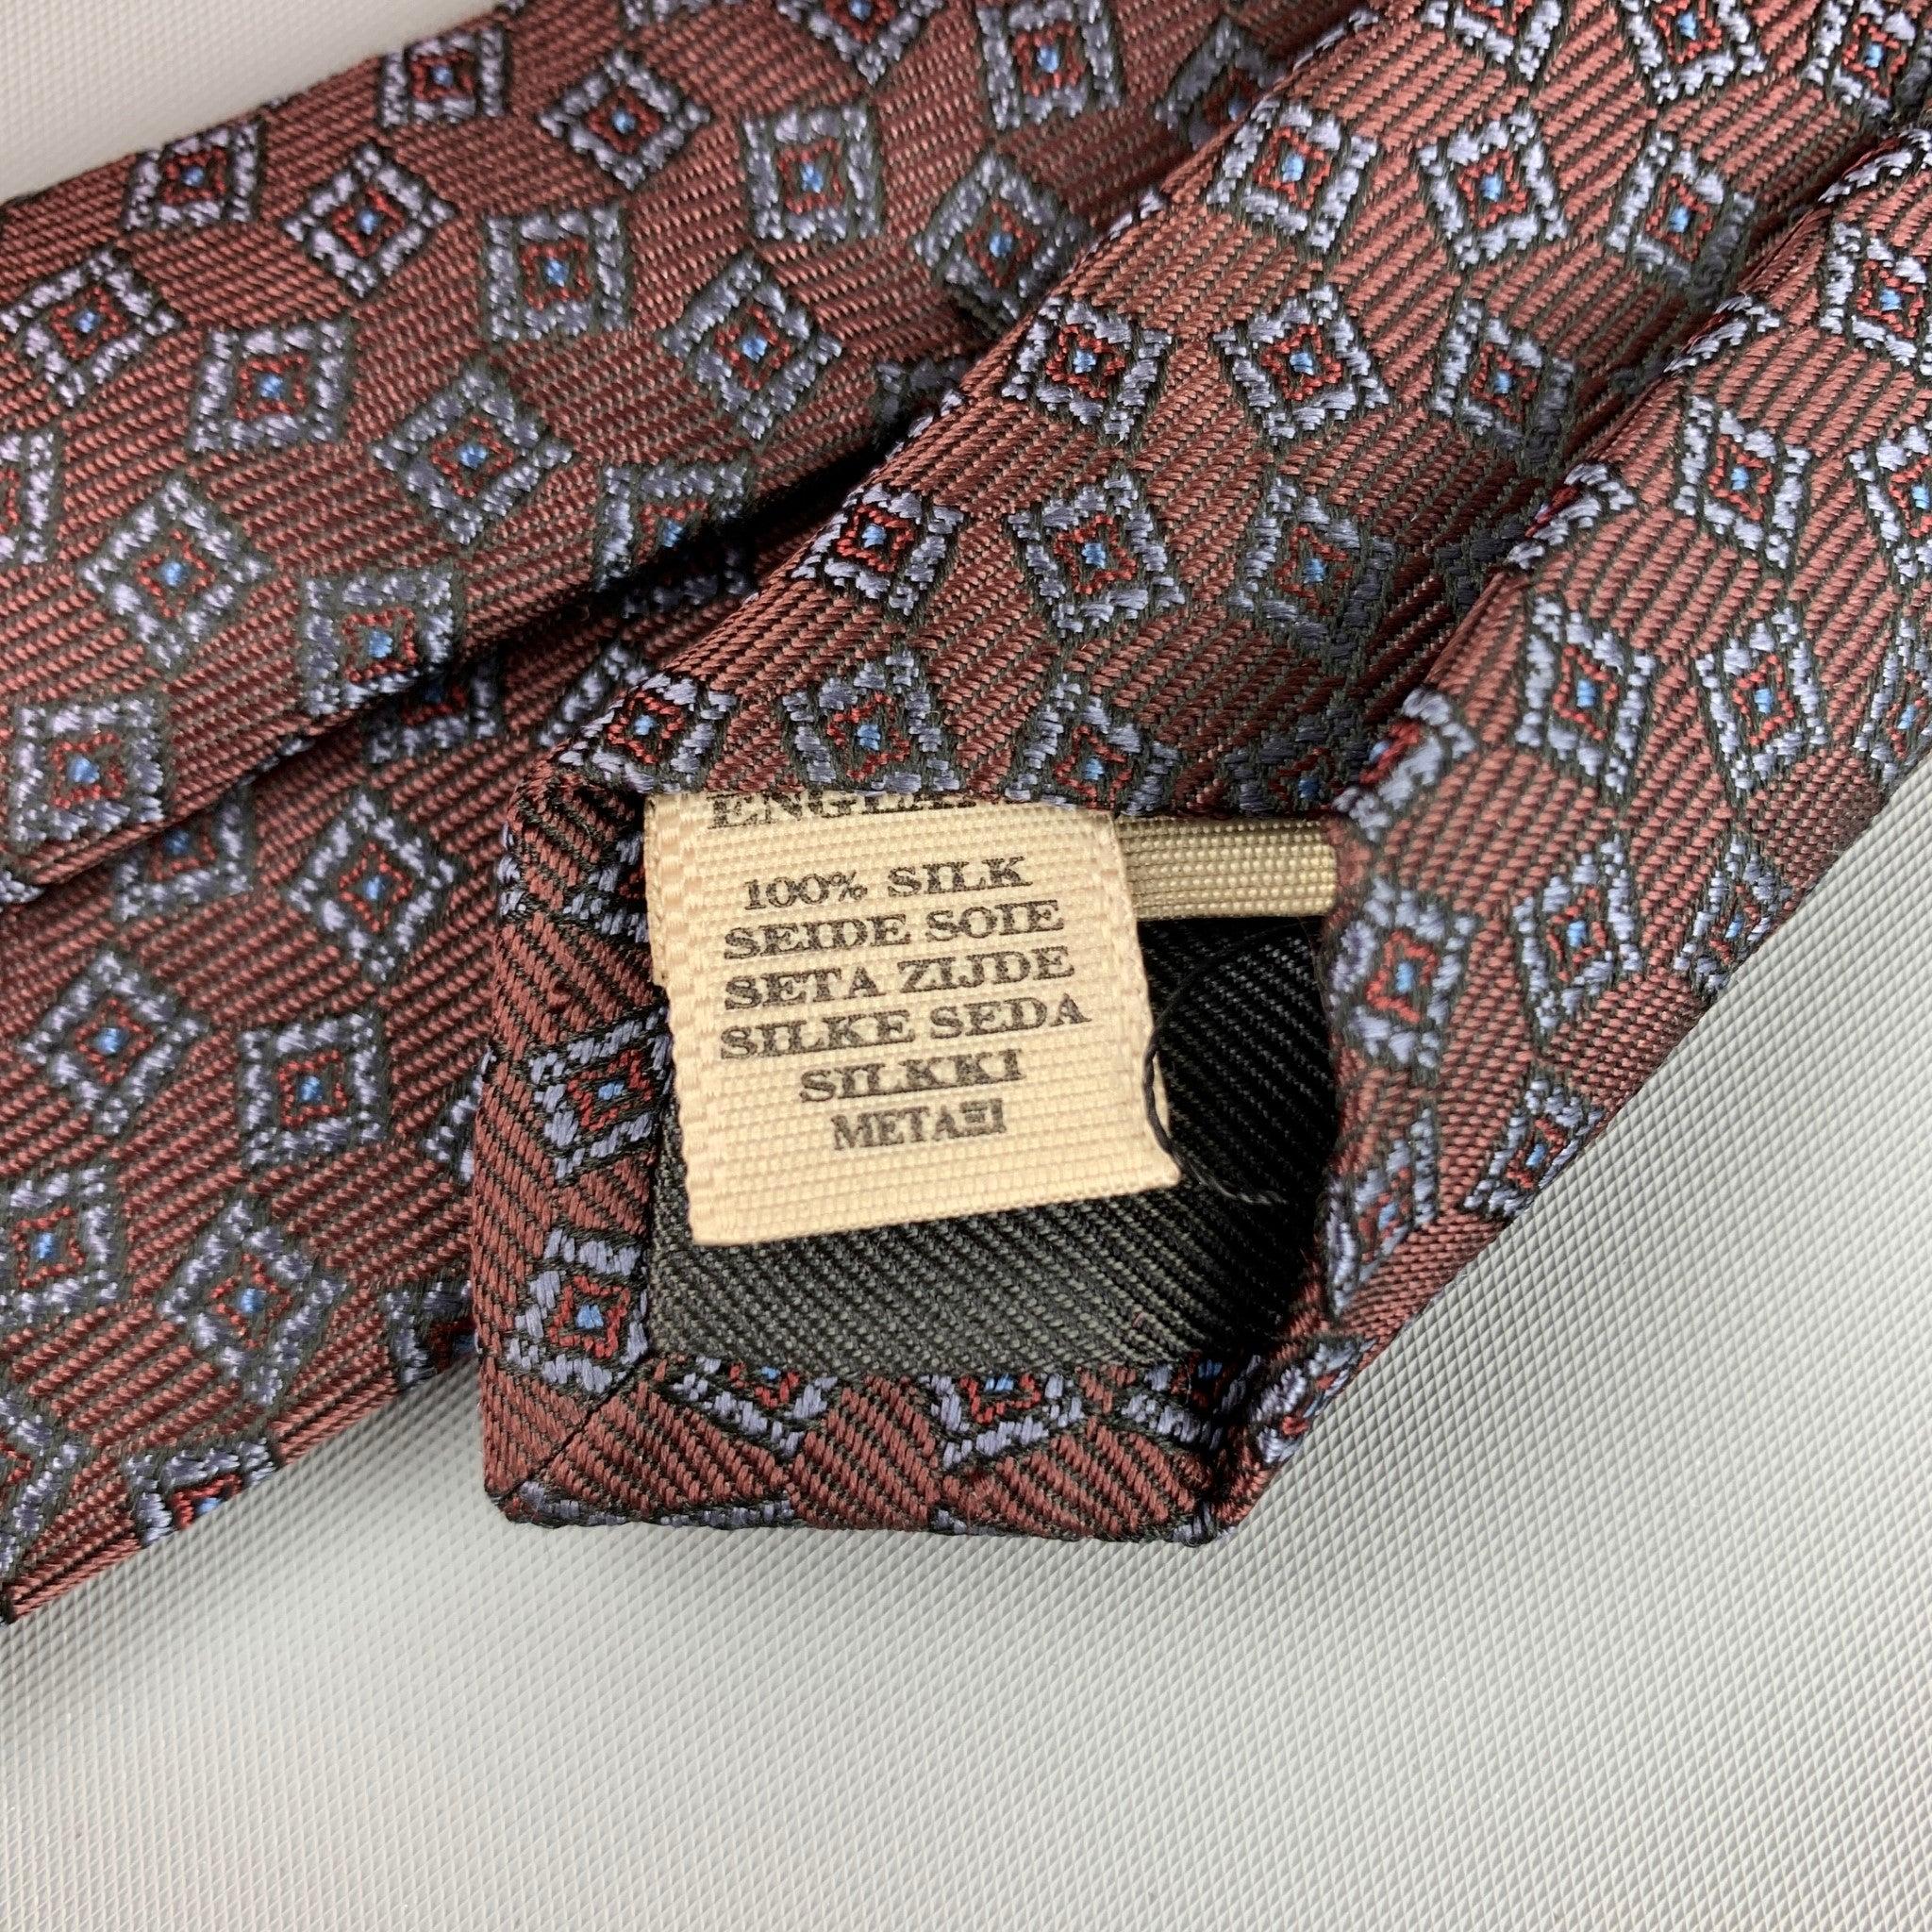 BURBERRY PRORSUM Brown Silk Print Skinny Tie In Good Condition For Sale In San Francisco, CA